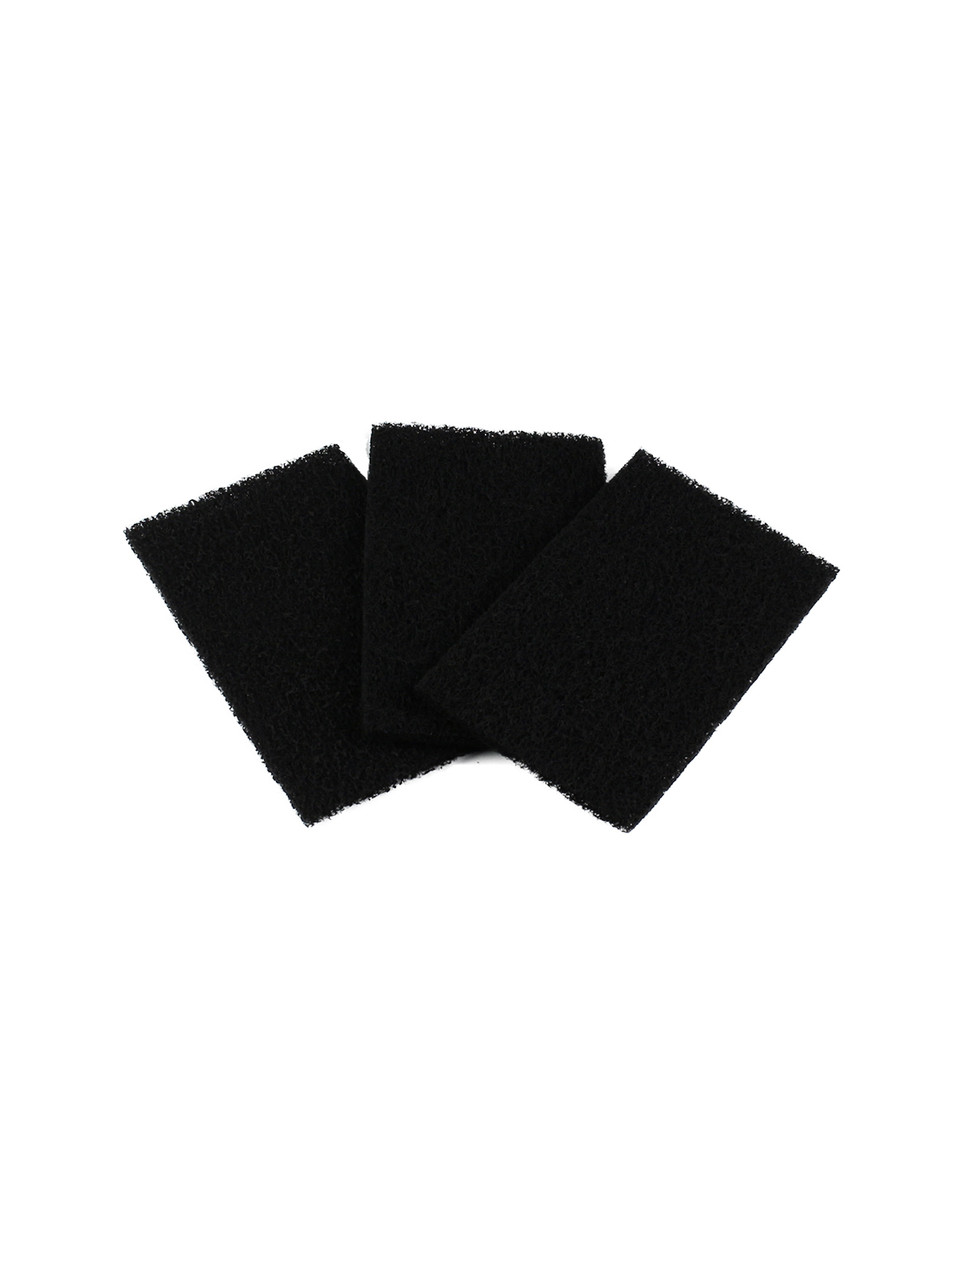 Charcoal Filter for Kitchen Compost Bin 102834